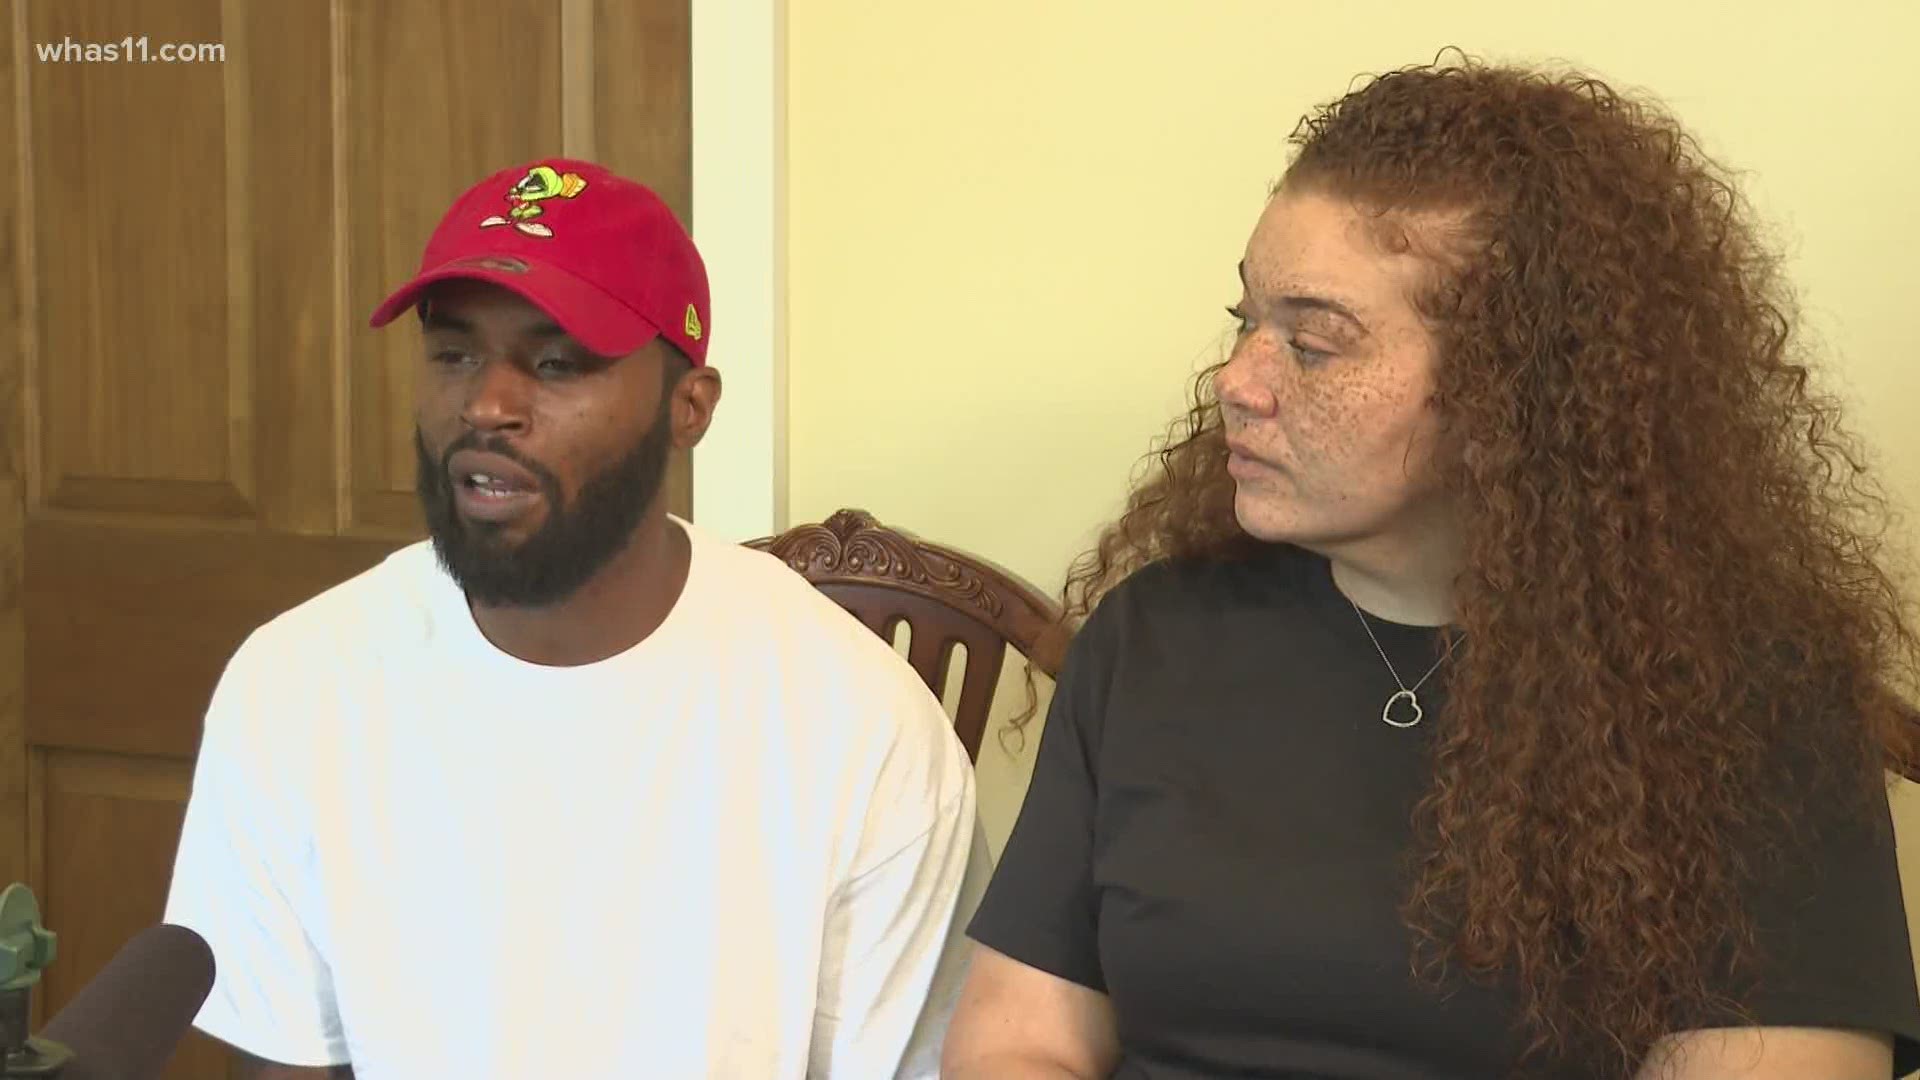 A Louisville family that fell victim to the controversial 'no knock' warrant is speaking out tonight after their close to death experience.